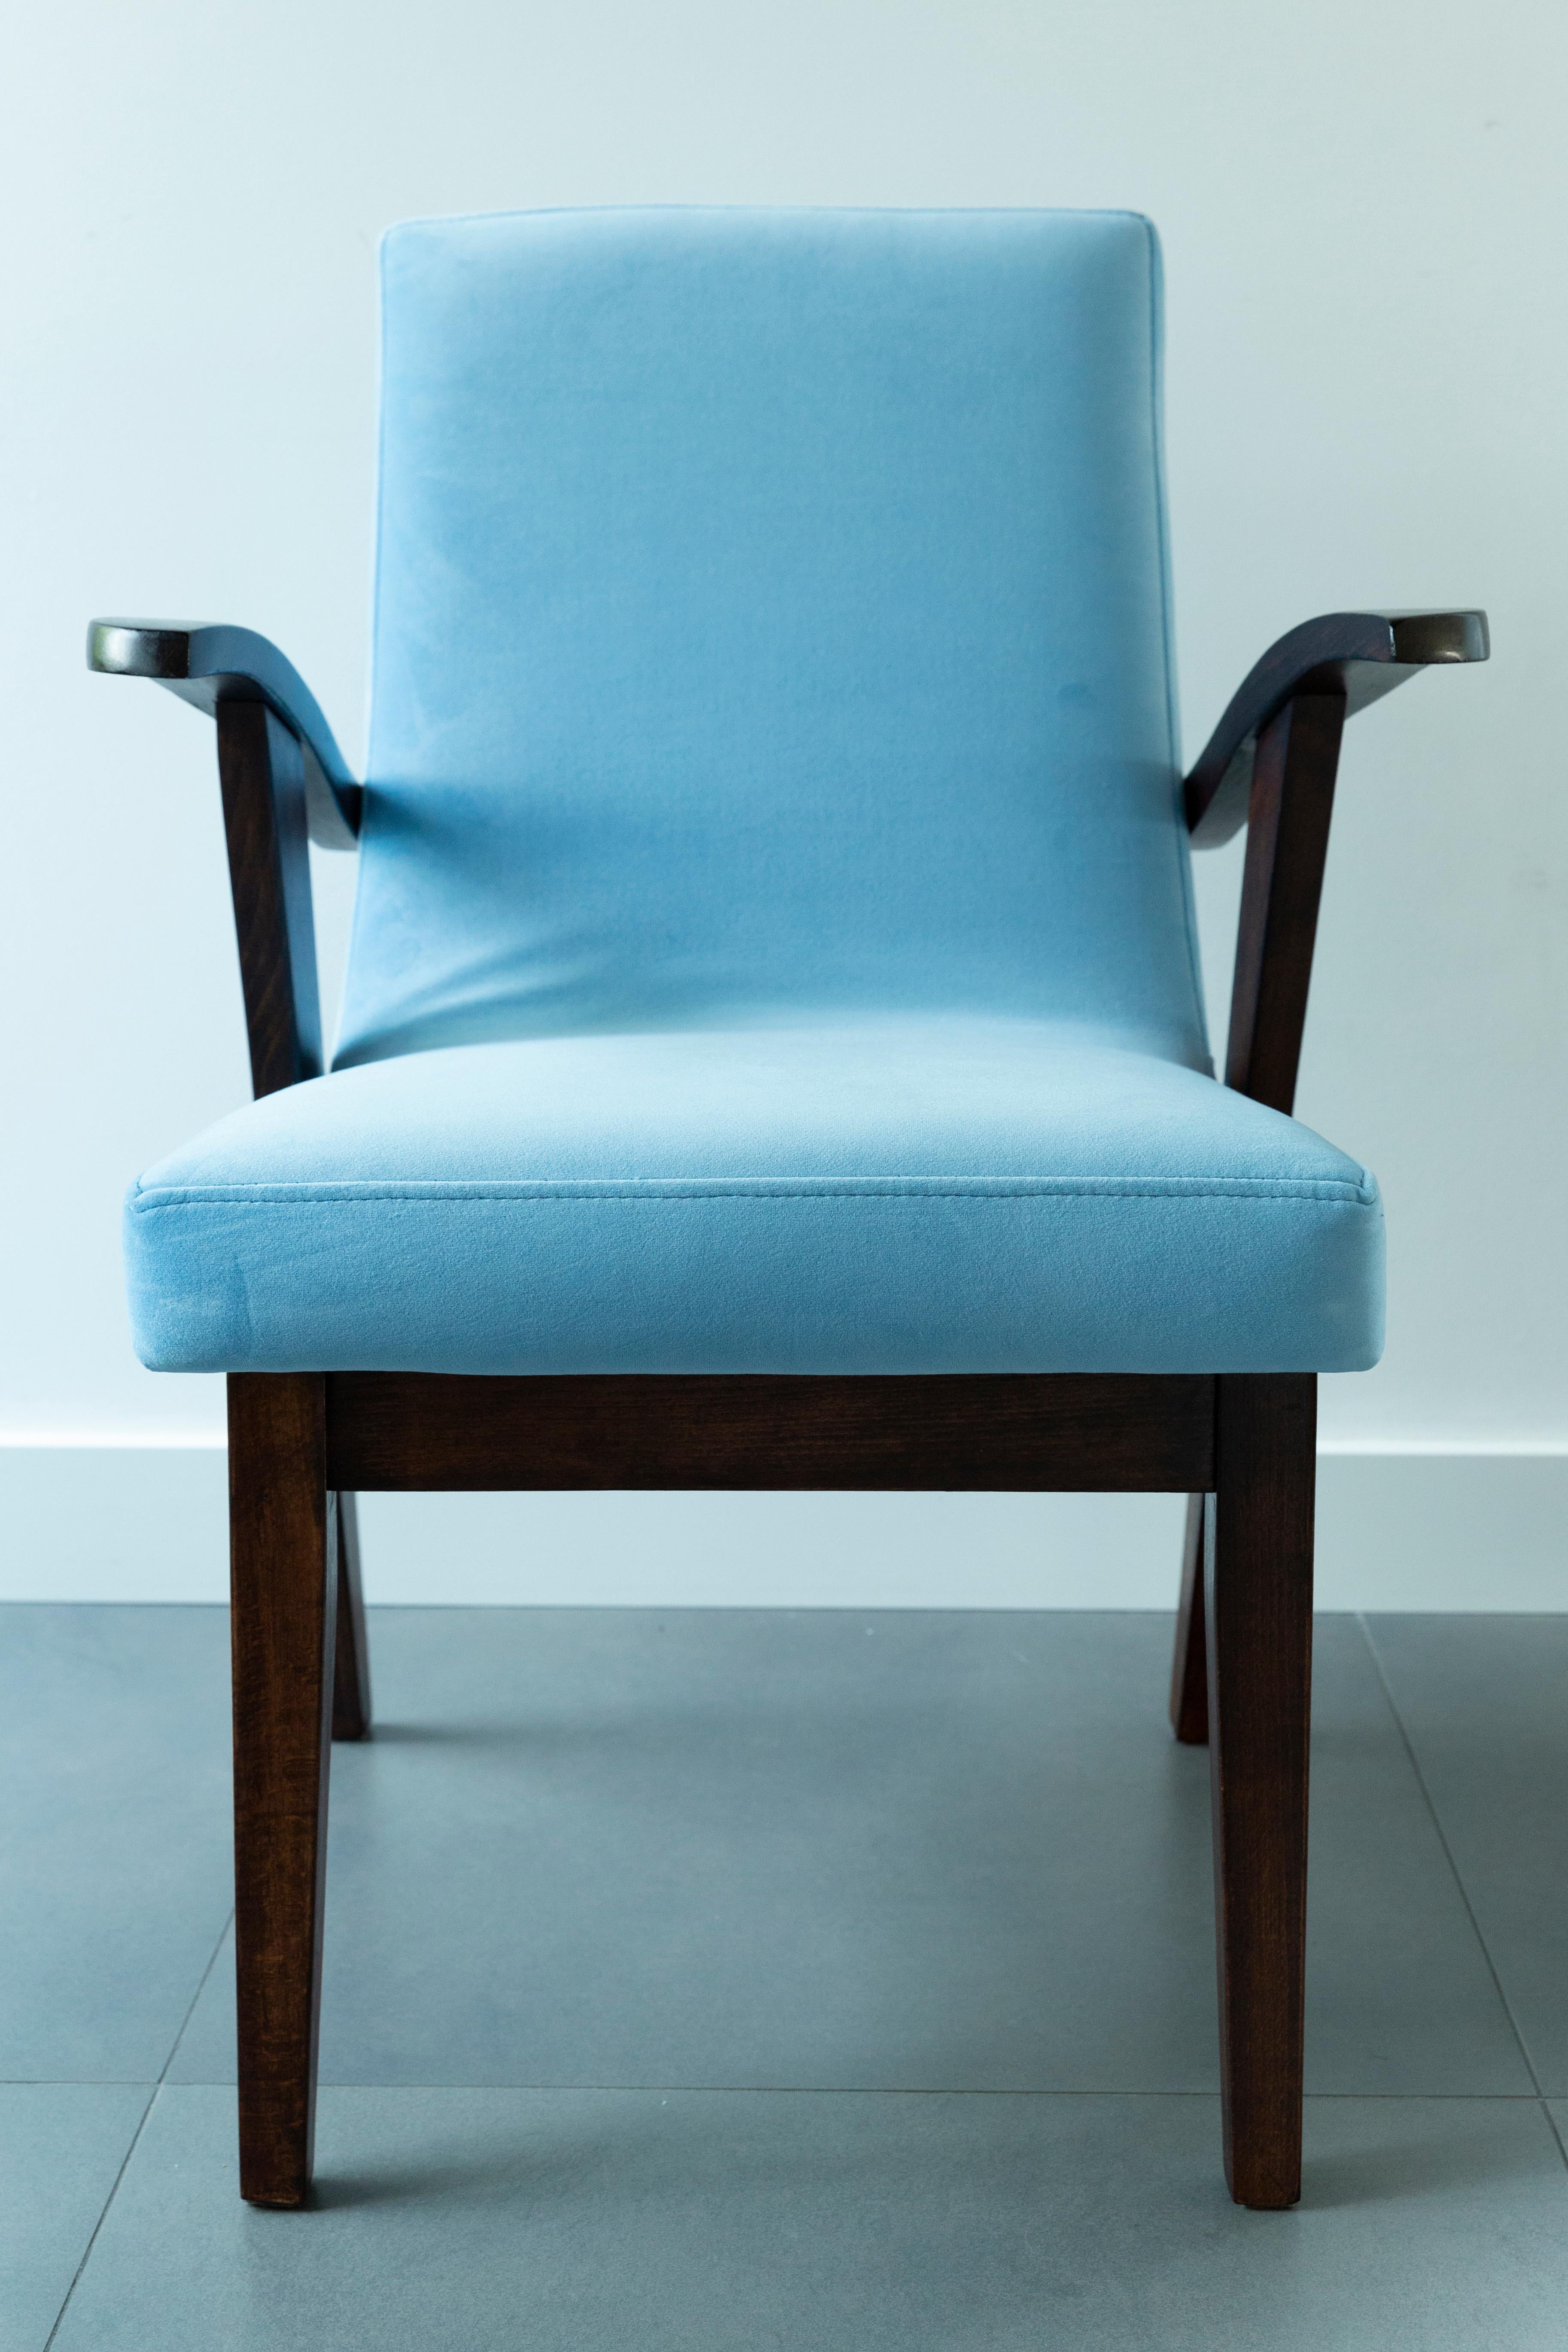 Set of Six 20th Century Armchairs in Baby Blue Velvet, Mieczyslaw Puchala, 1960s For Sale 4